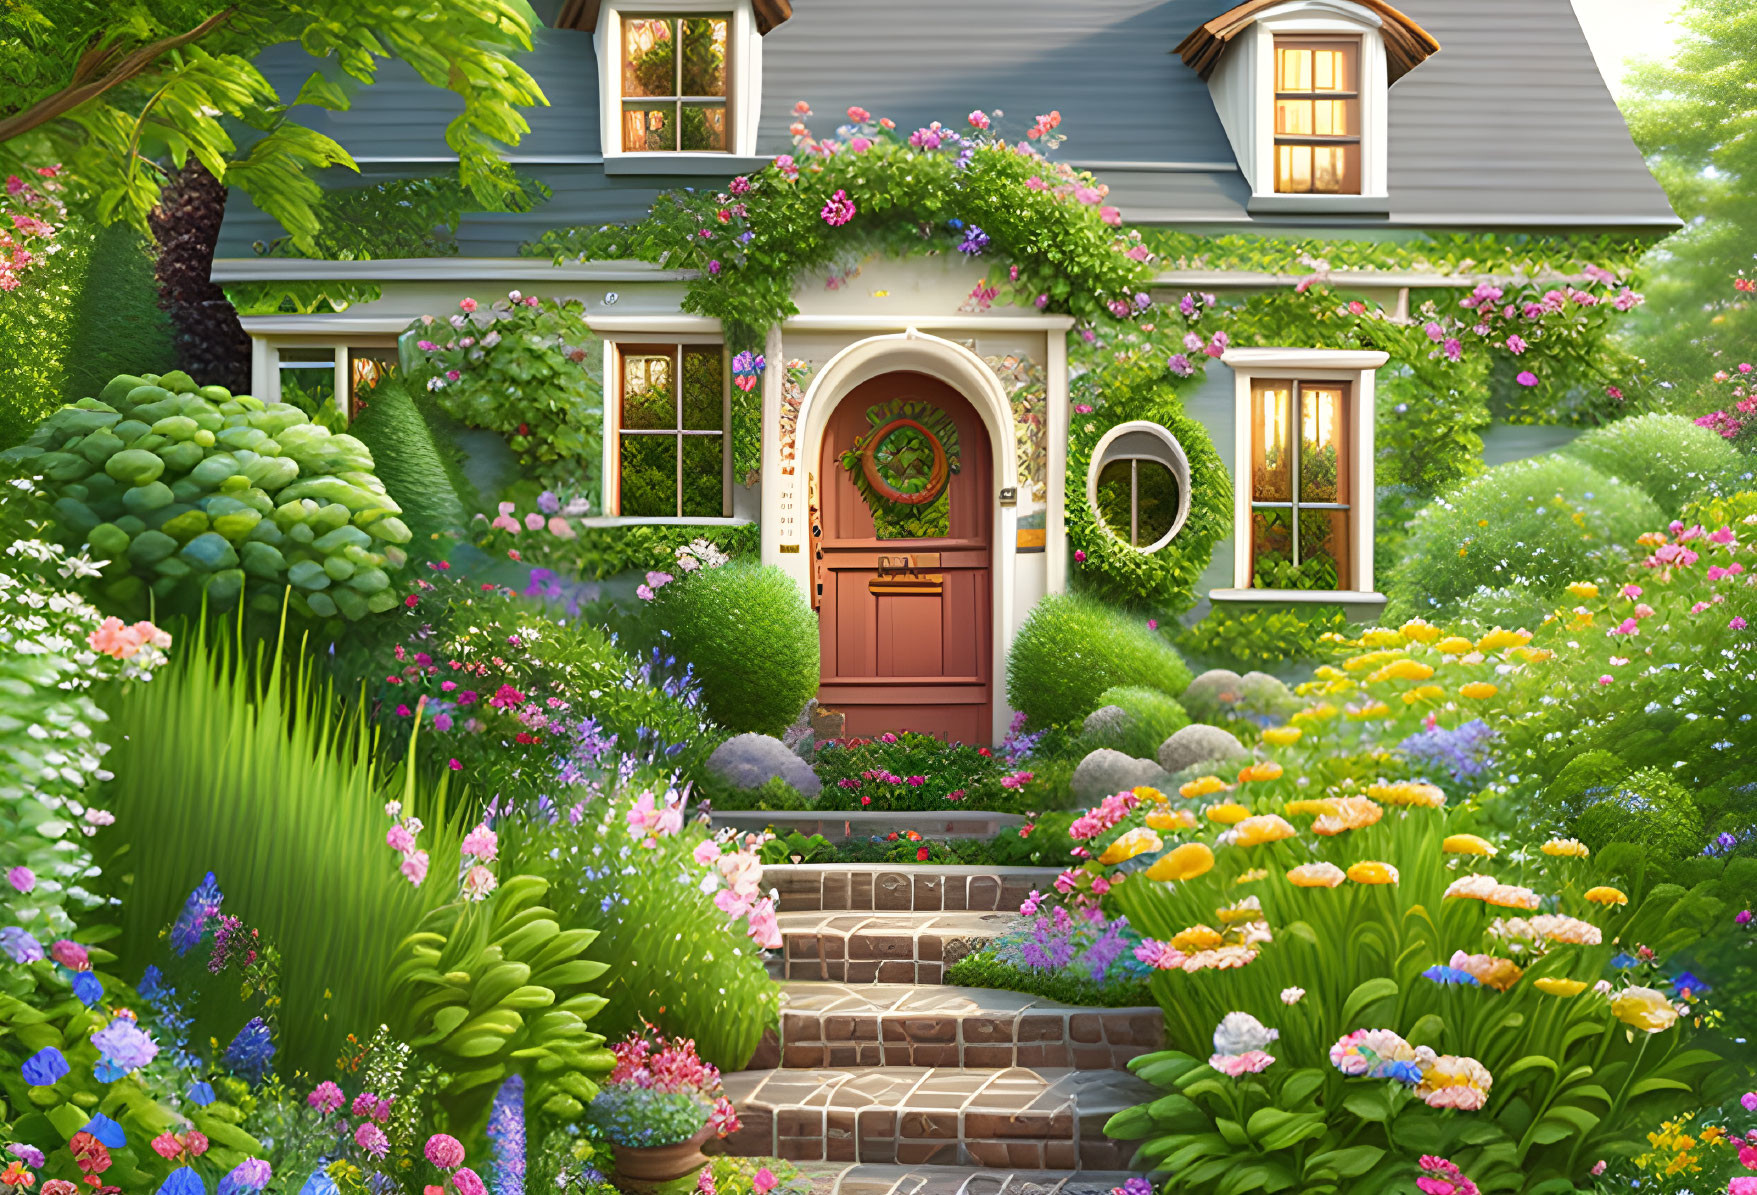 Charming cottage with vibrant gardens and pink door